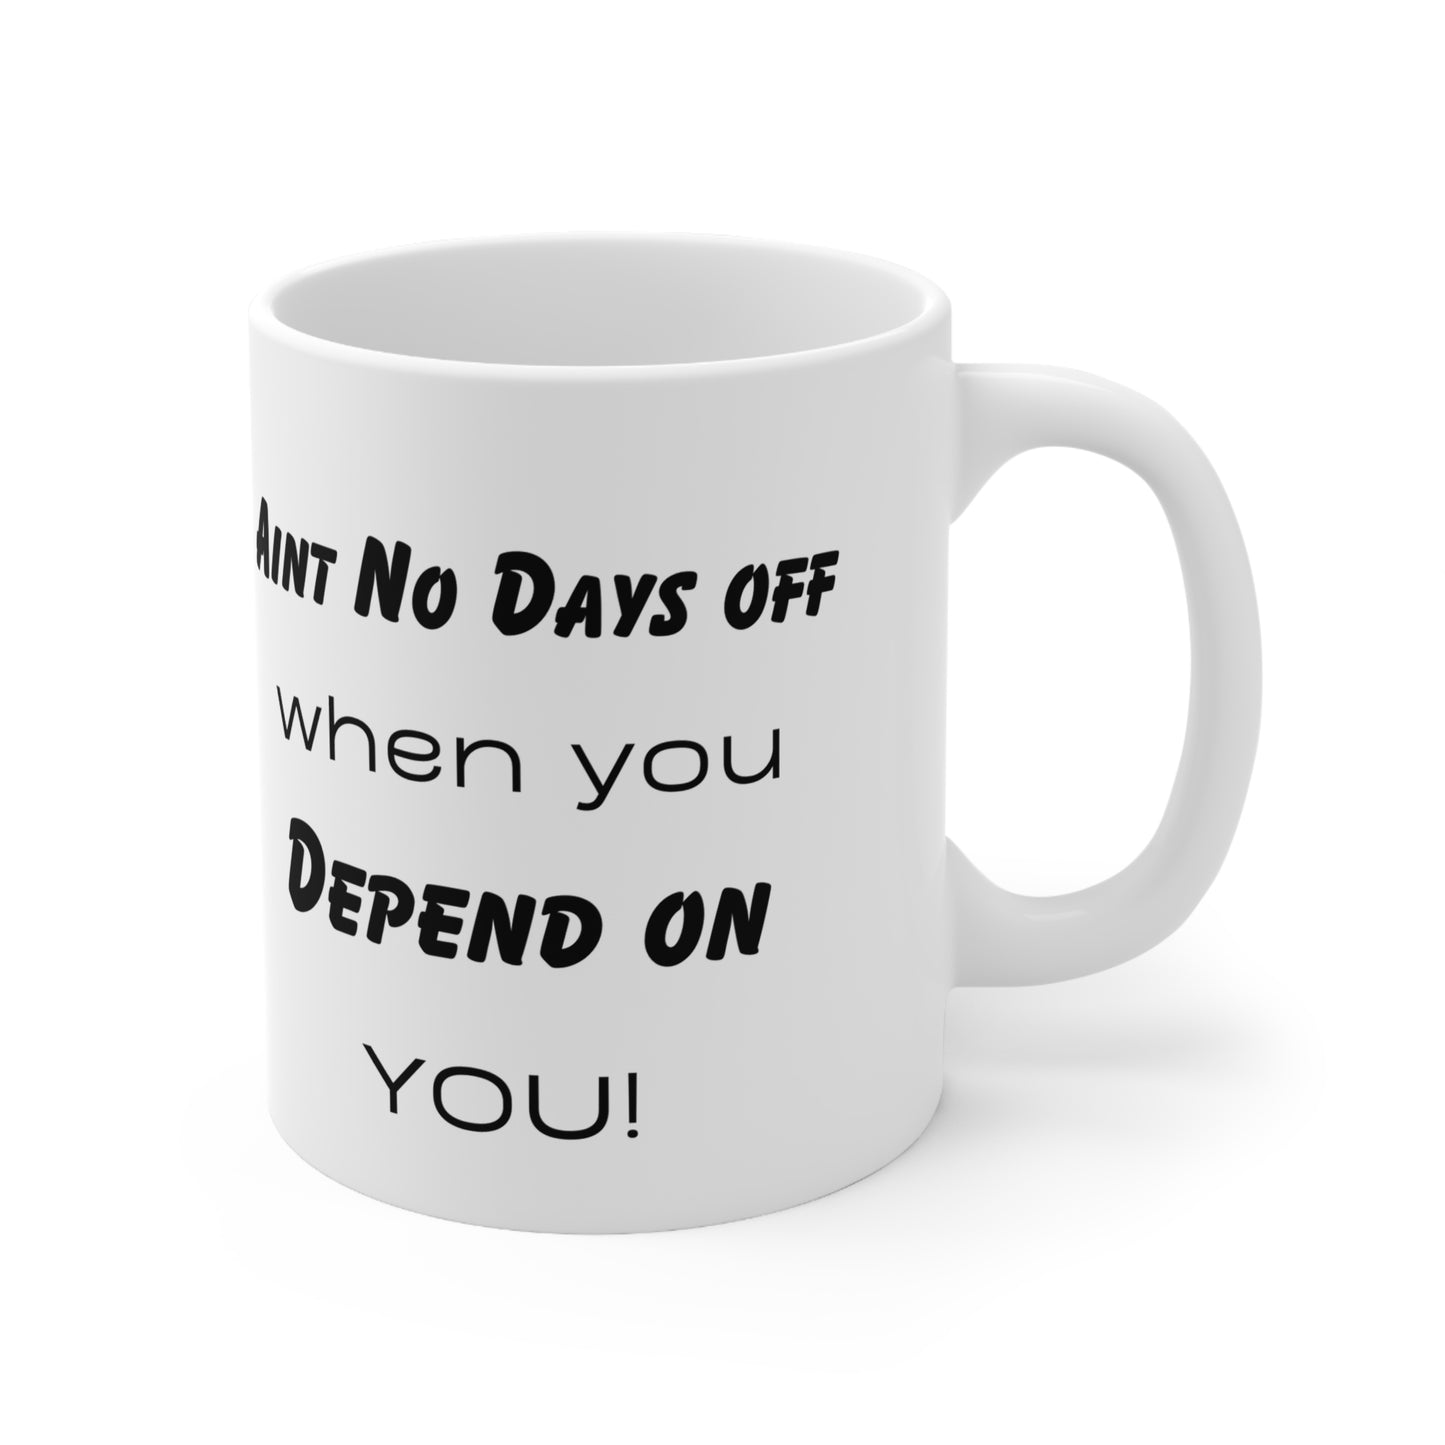 Aint no days off when you depend on YOU! Ceramic Coffee Cups, 11oz, 15oz